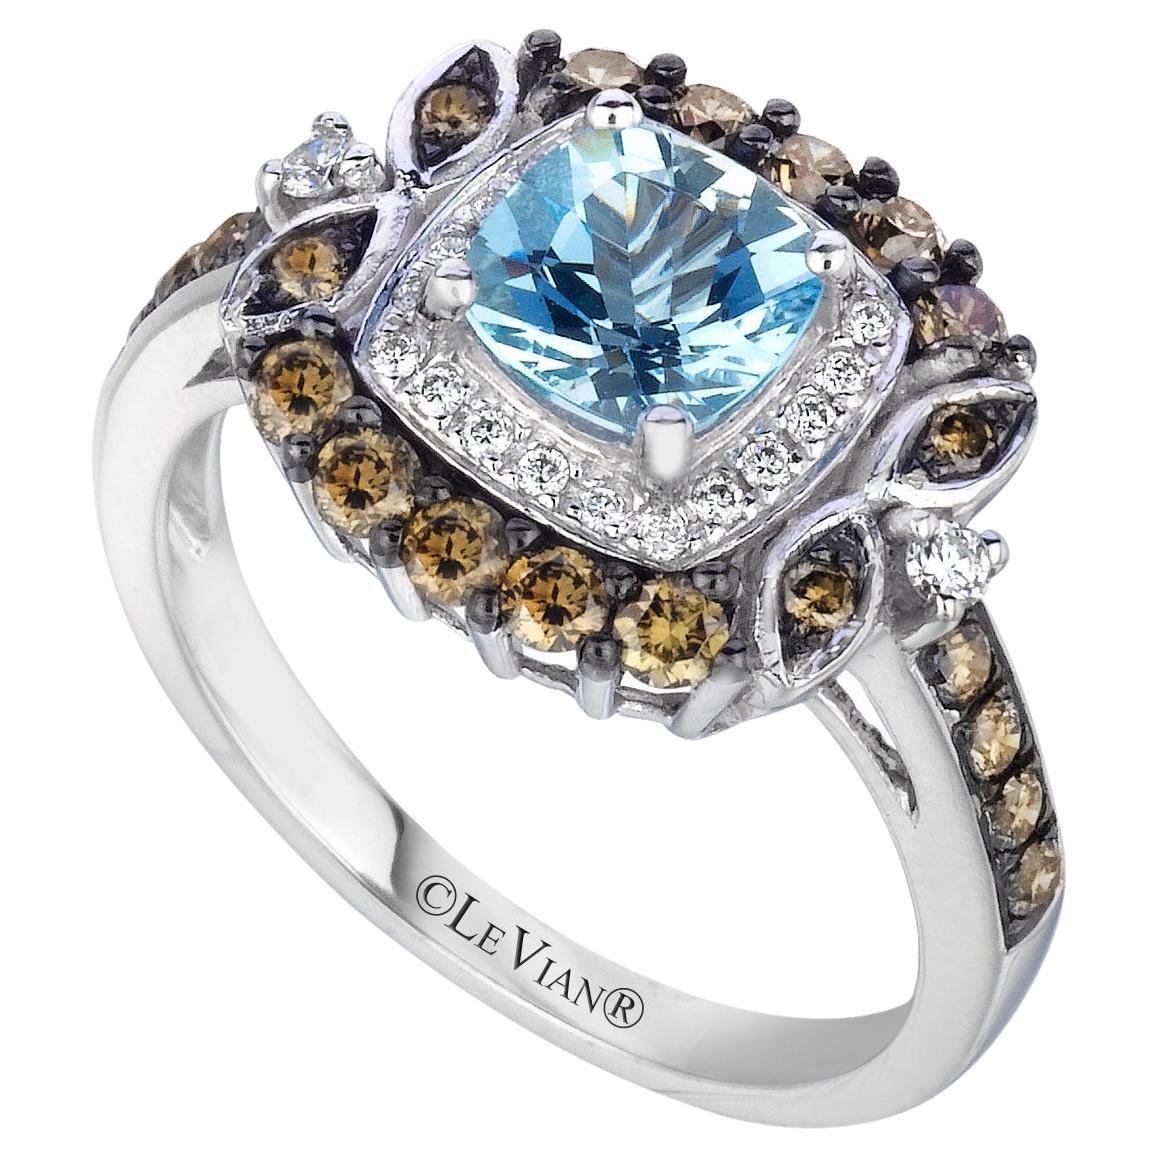 Levian Ring Aquamarine Chocolate White Diamond In 14K White Gold 1 3 8Cts For Sale